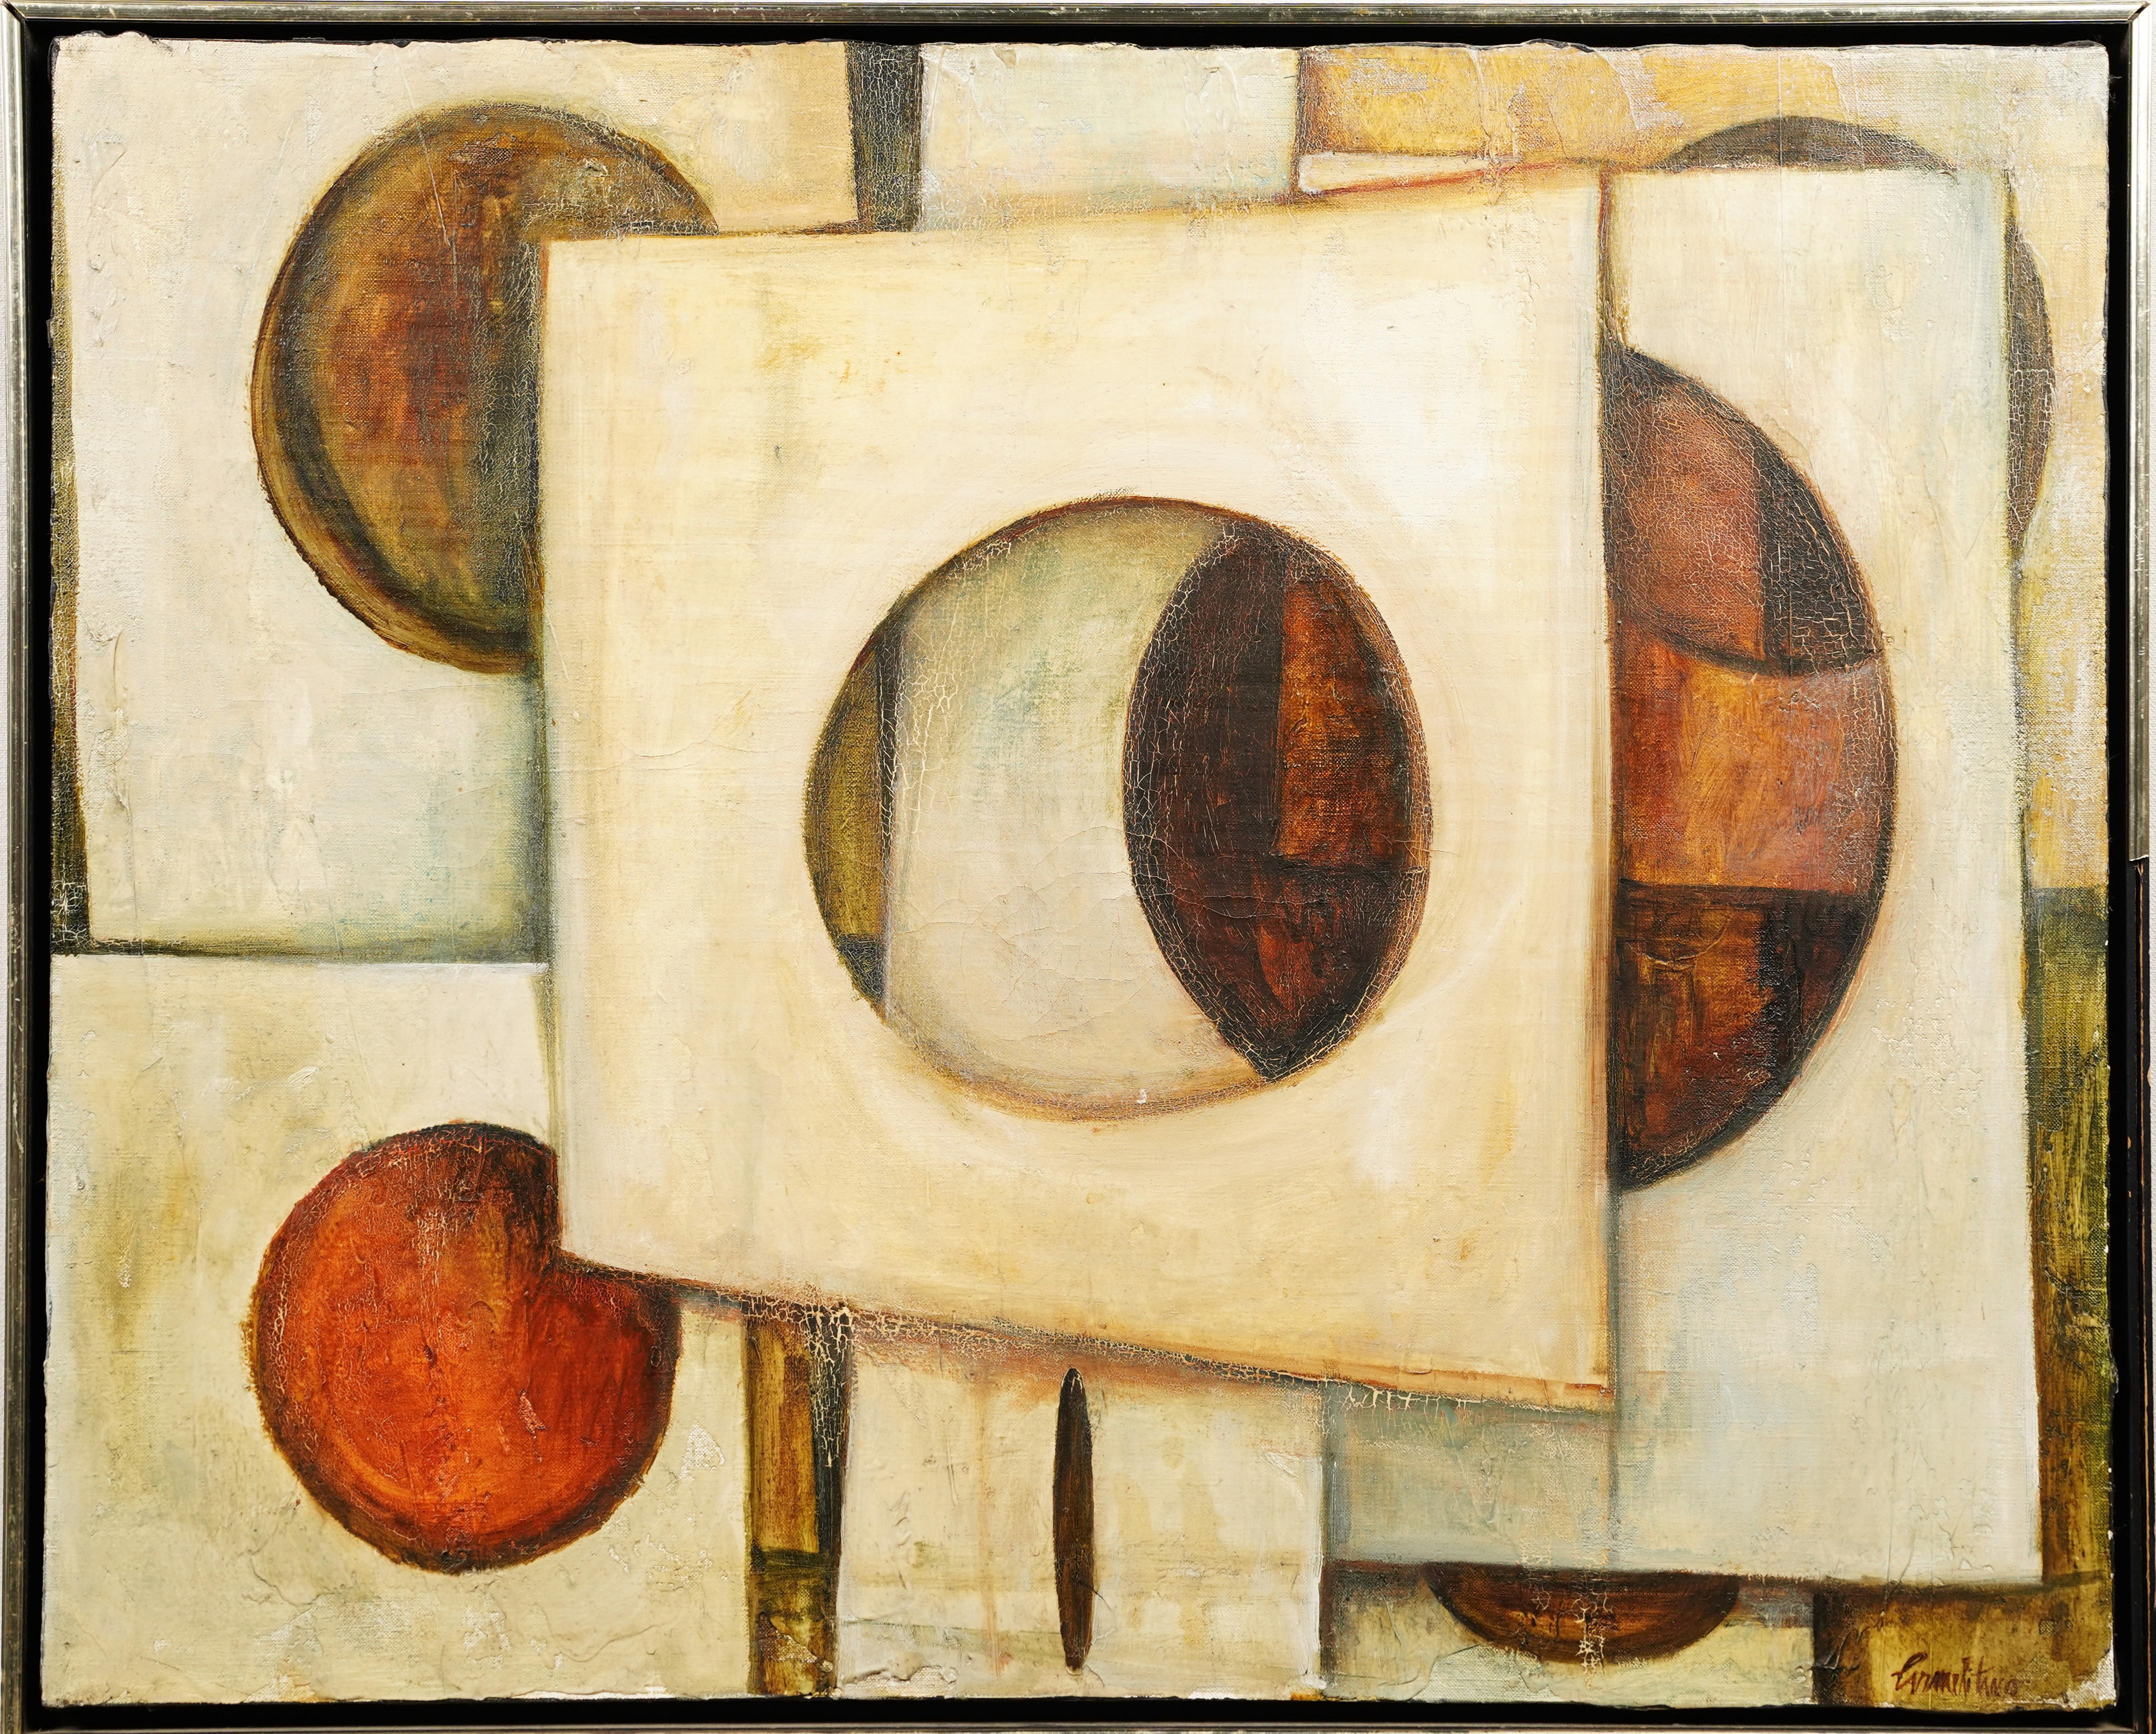 Antique American modernist abstract oil painting.  Oil on canvas.  Framed.  Image size, 30L x 24H.